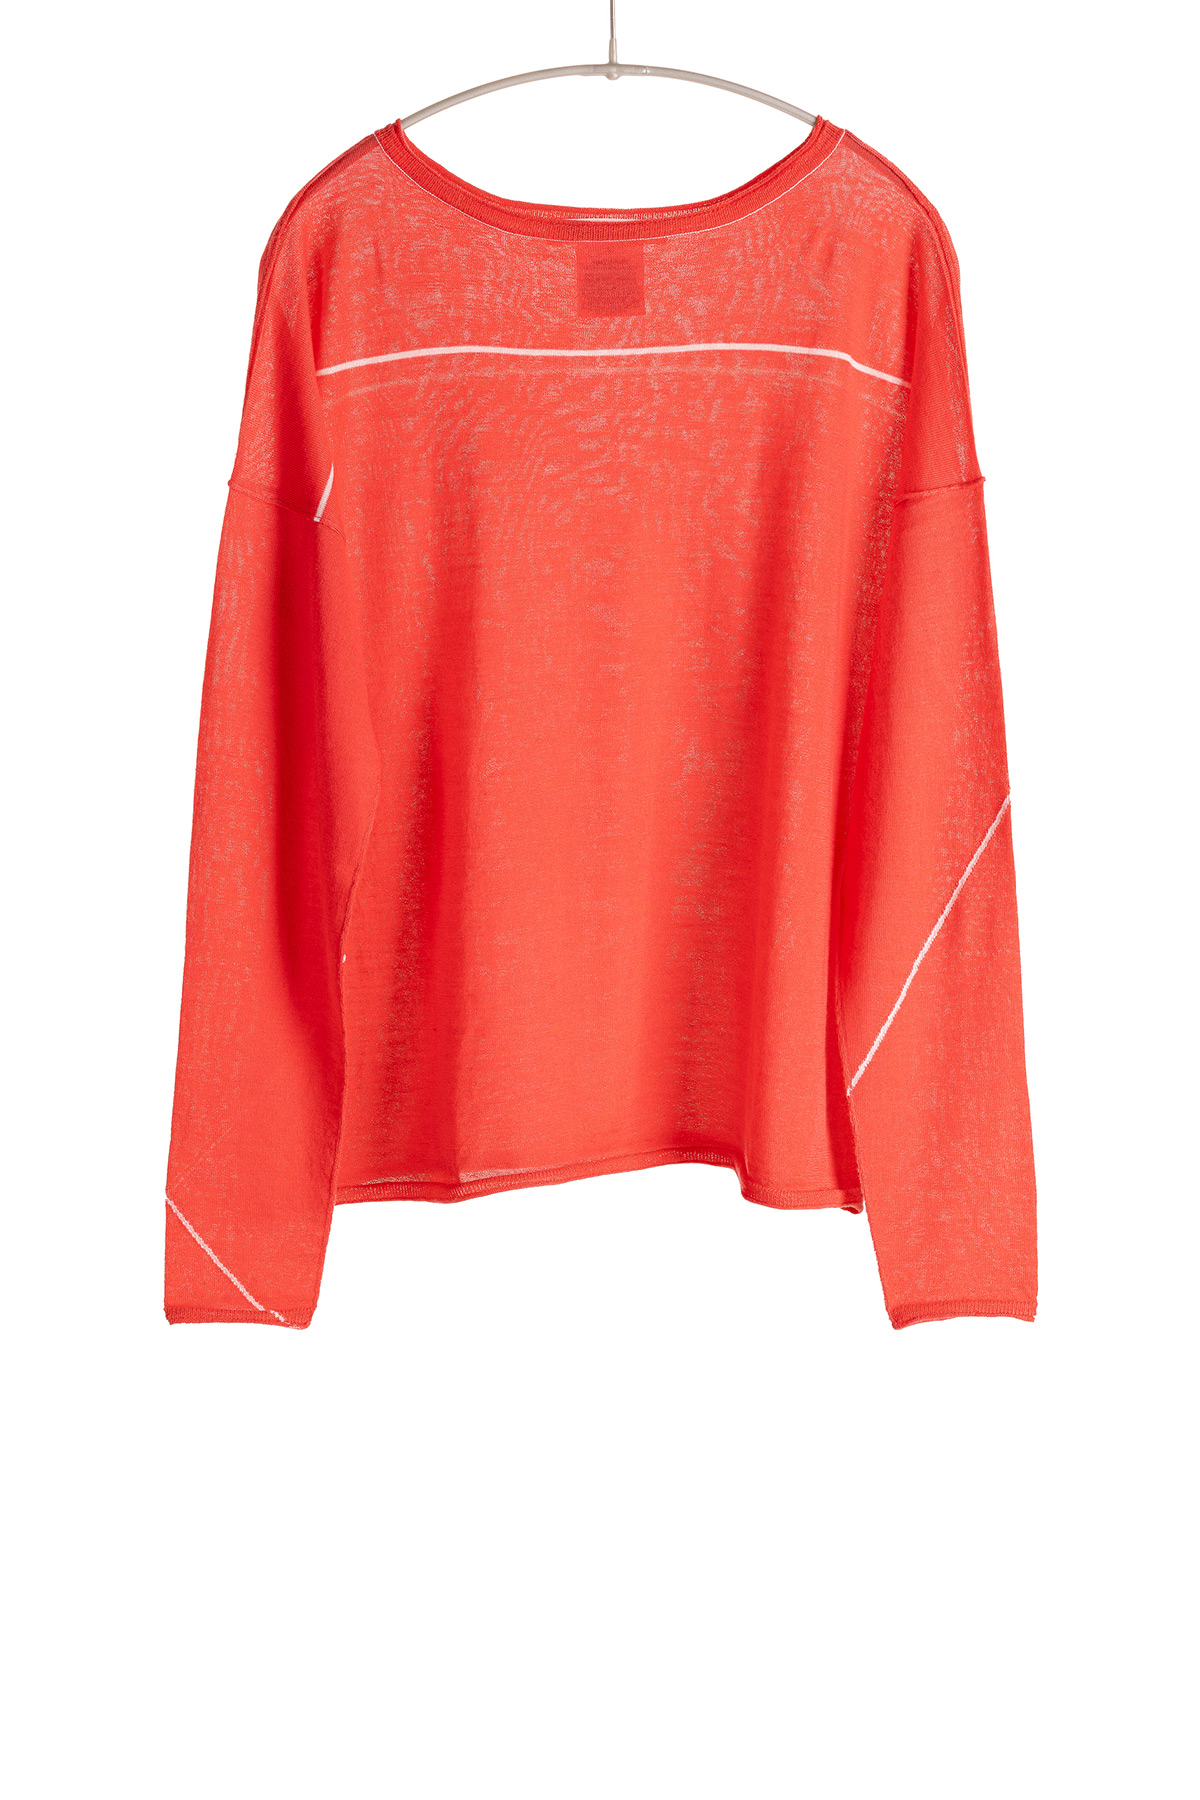 S407_BateauPullover_HotCoral_H1Front